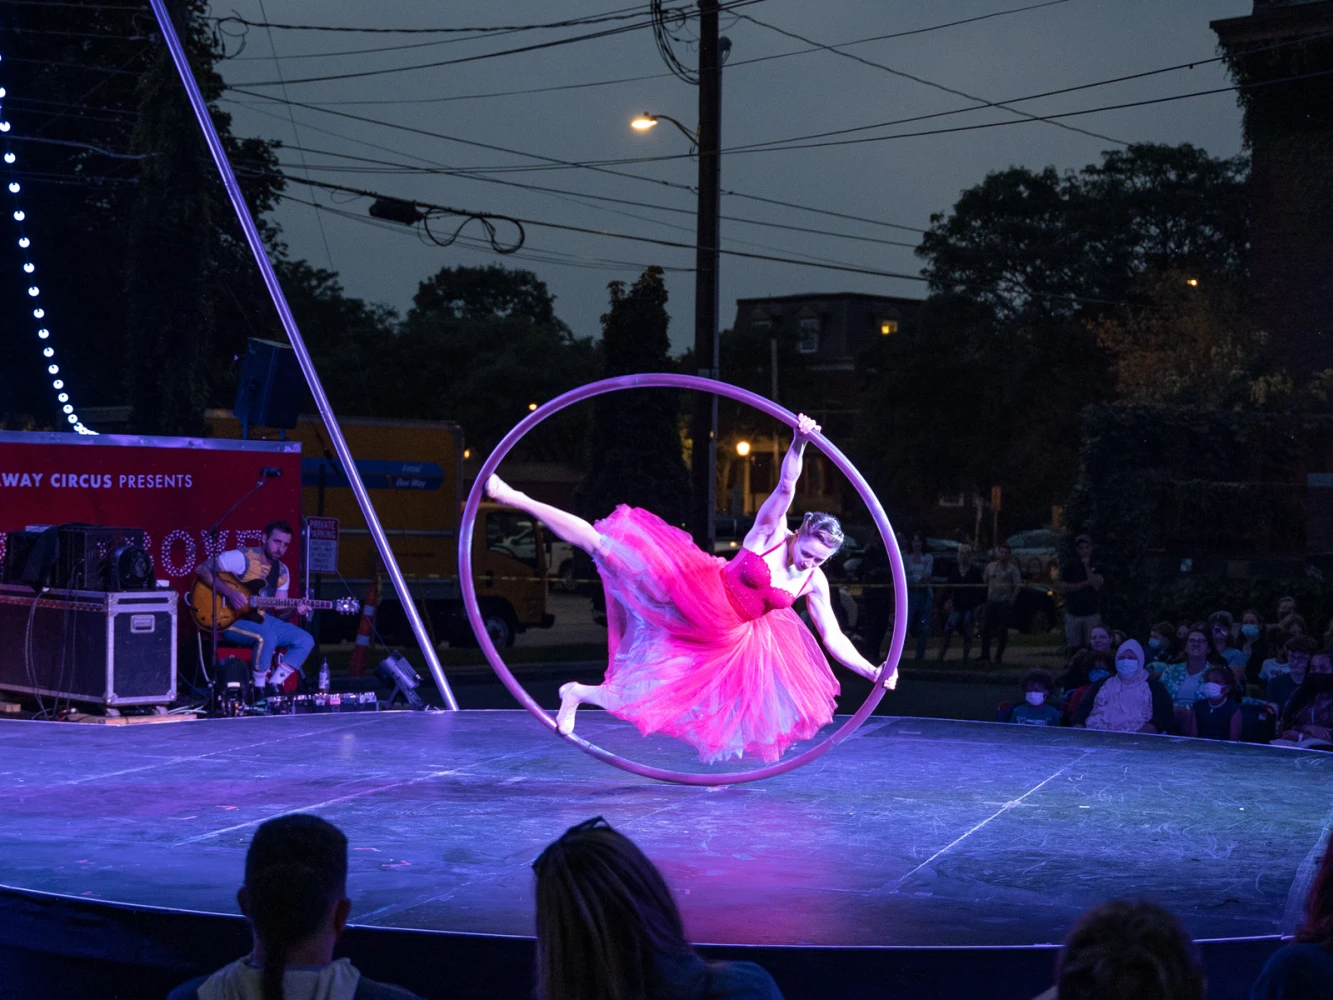 Stars Above: An All American Open Air Circus: What to expect - 1